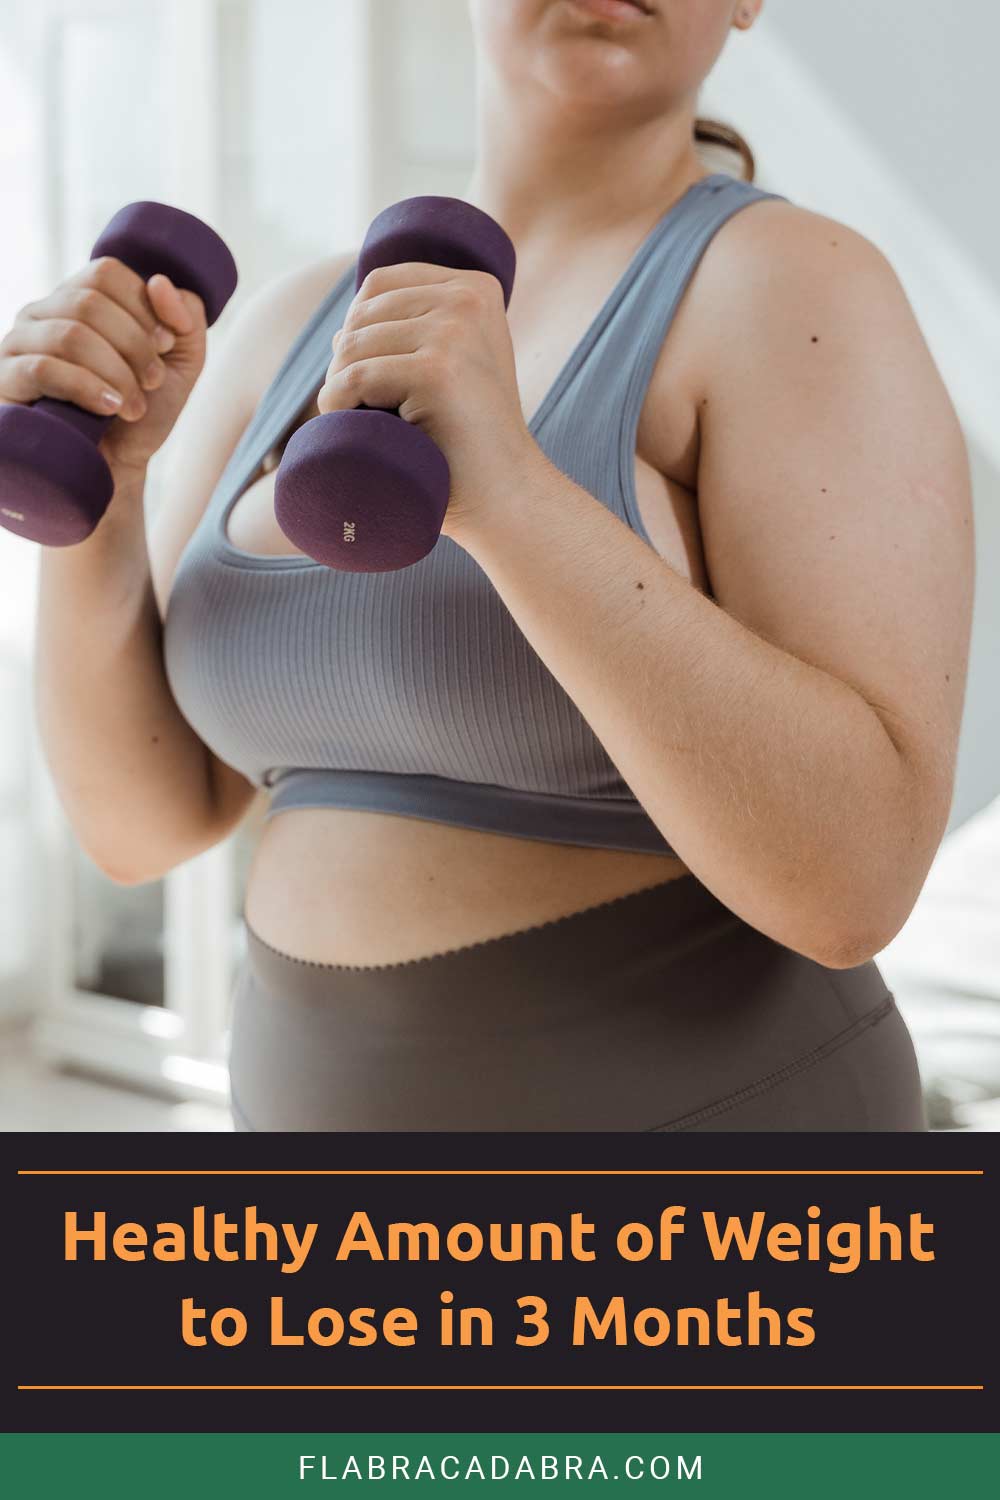 Overweight woman with dumbbells in two hands - Healthy Amount of Weight to Lose in 3 Months